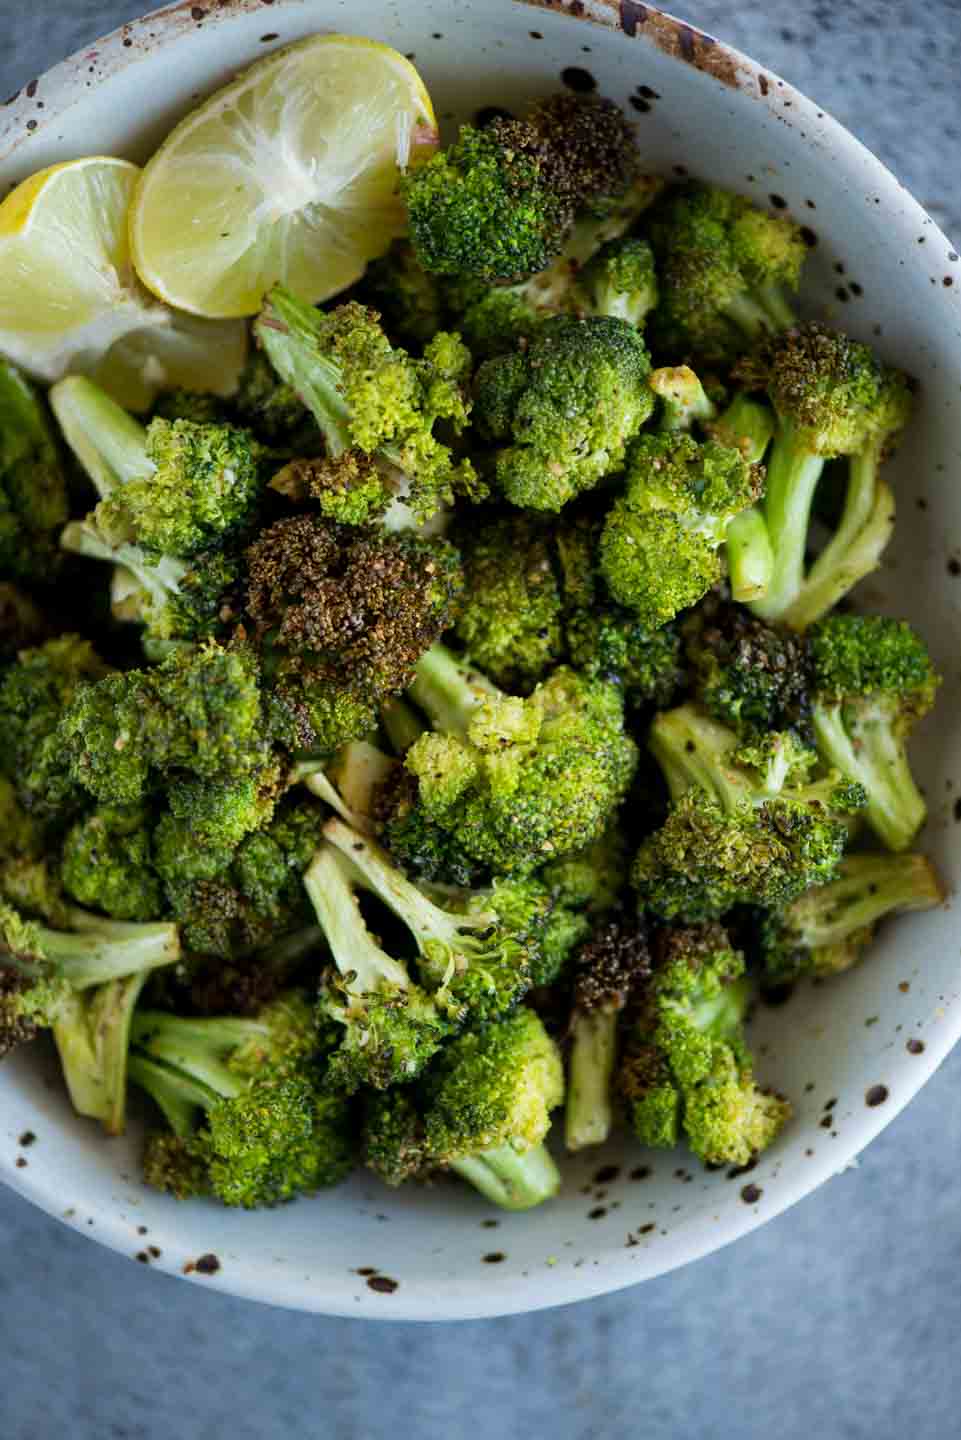 Bowl of Airfryer roasted broccoli with slices of lemon